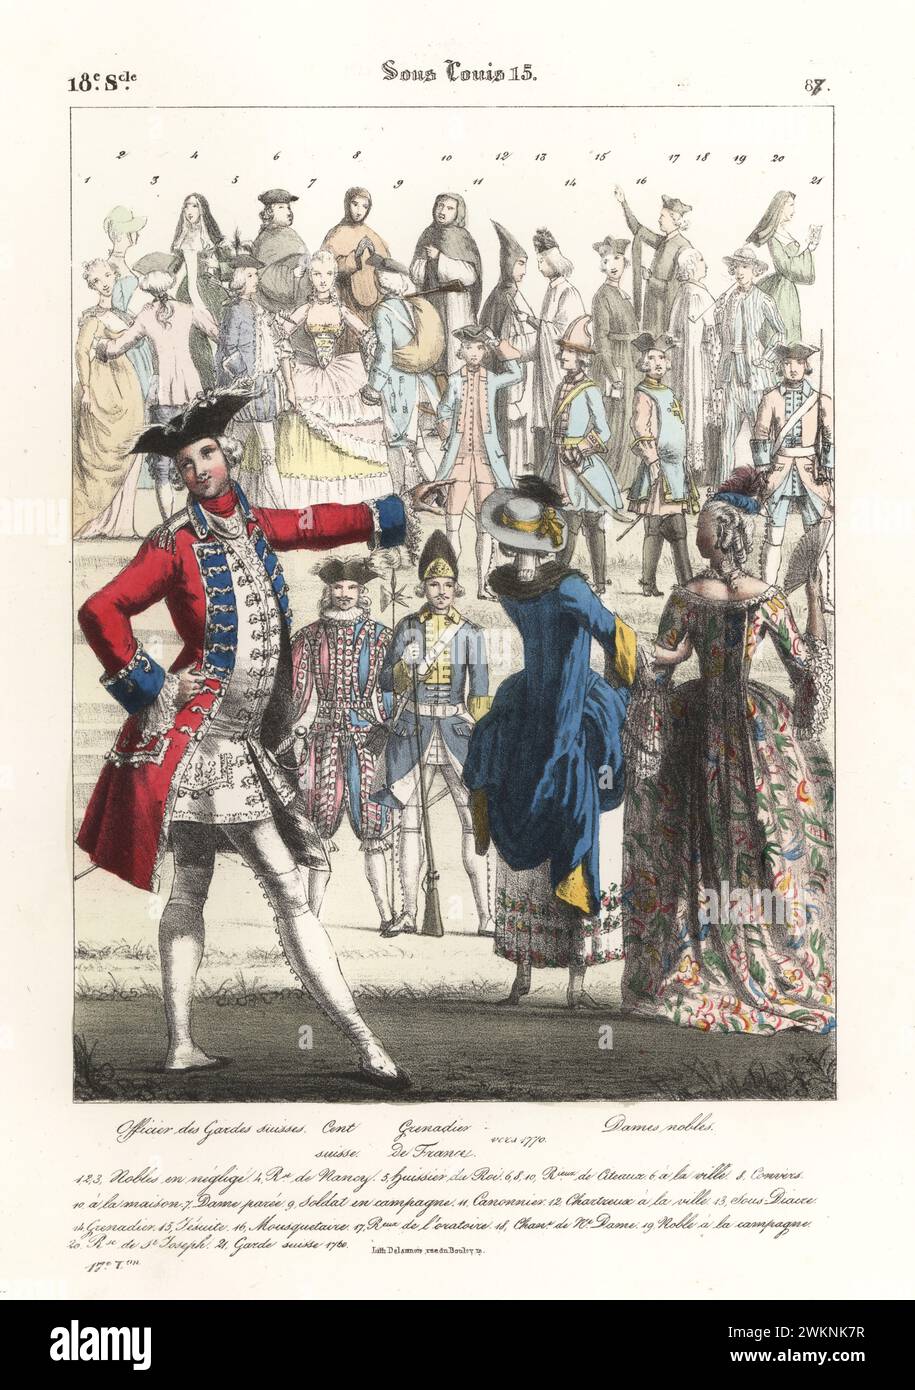 Officer of the Swiss Guards with French noblewomen, 18th century. With a soldier of the Hundred Swiss and a French Grenadier in military uniform. Officier des Gardes Suisses, Cent Suisse, Grenadier de France, Dames nobles. Sous Louis 15. Handcoloured lithograph by Godard after an illustration by Charles Auguste Herbé from his own Costumes Francais, Civils, Militaires et Religieux, French Costumes, Civil, Military and Religious, Maison Martinet, Paris, 1837. Stock Photo